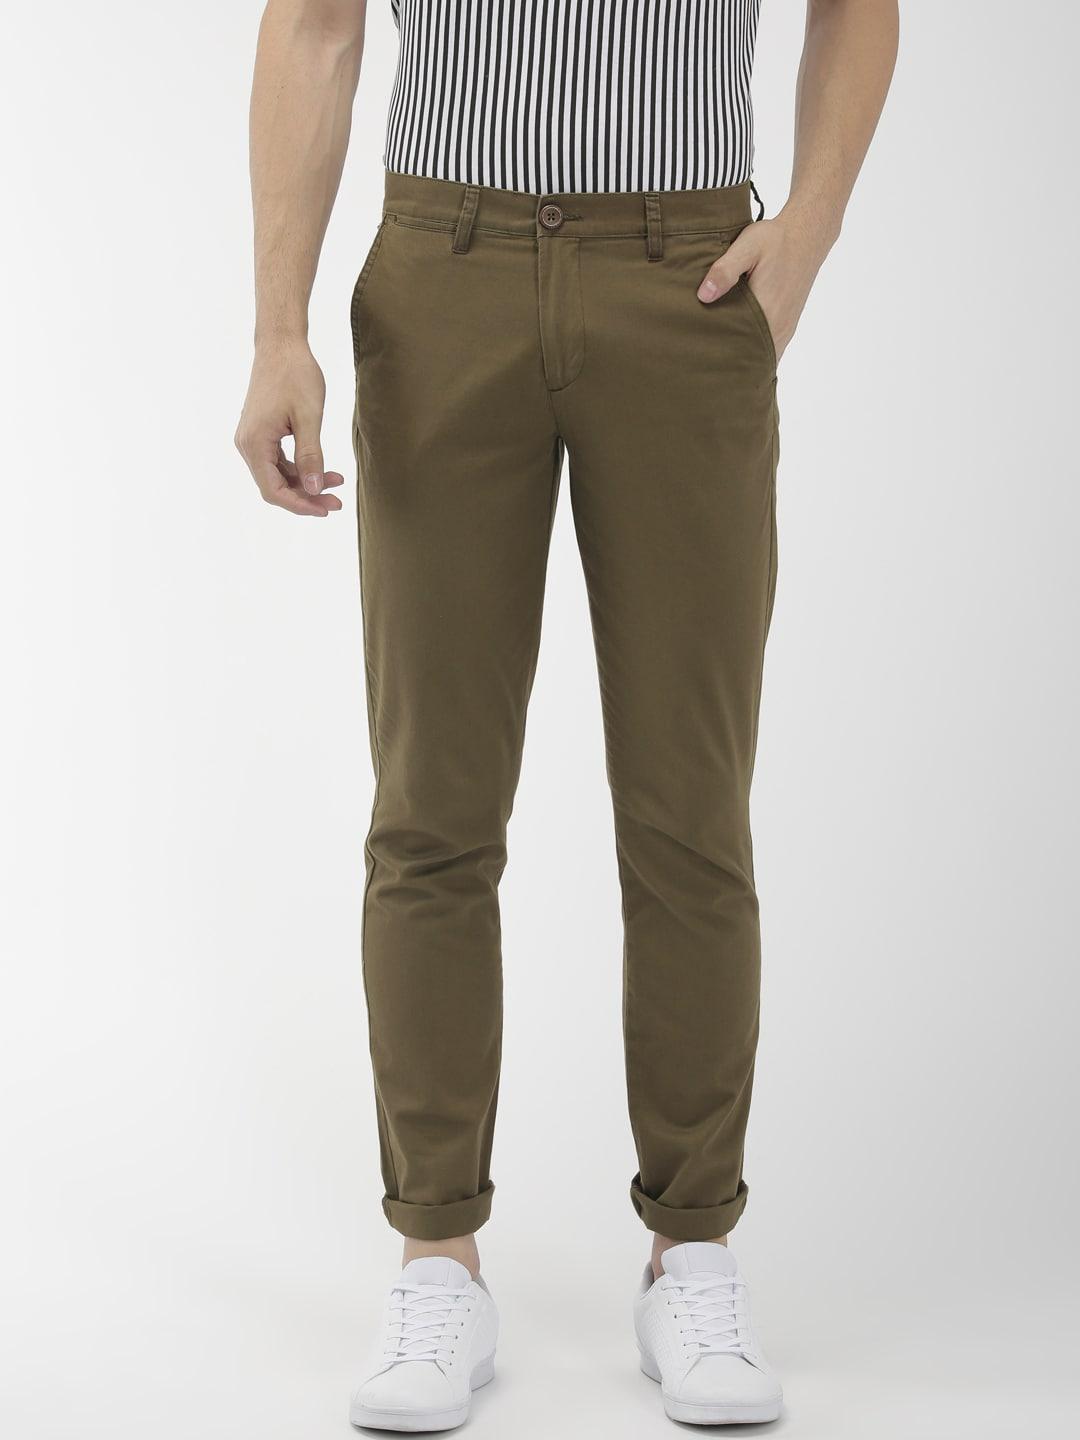 The Indian Garage Co Men Olive Green Slim Fit Solid Chinos